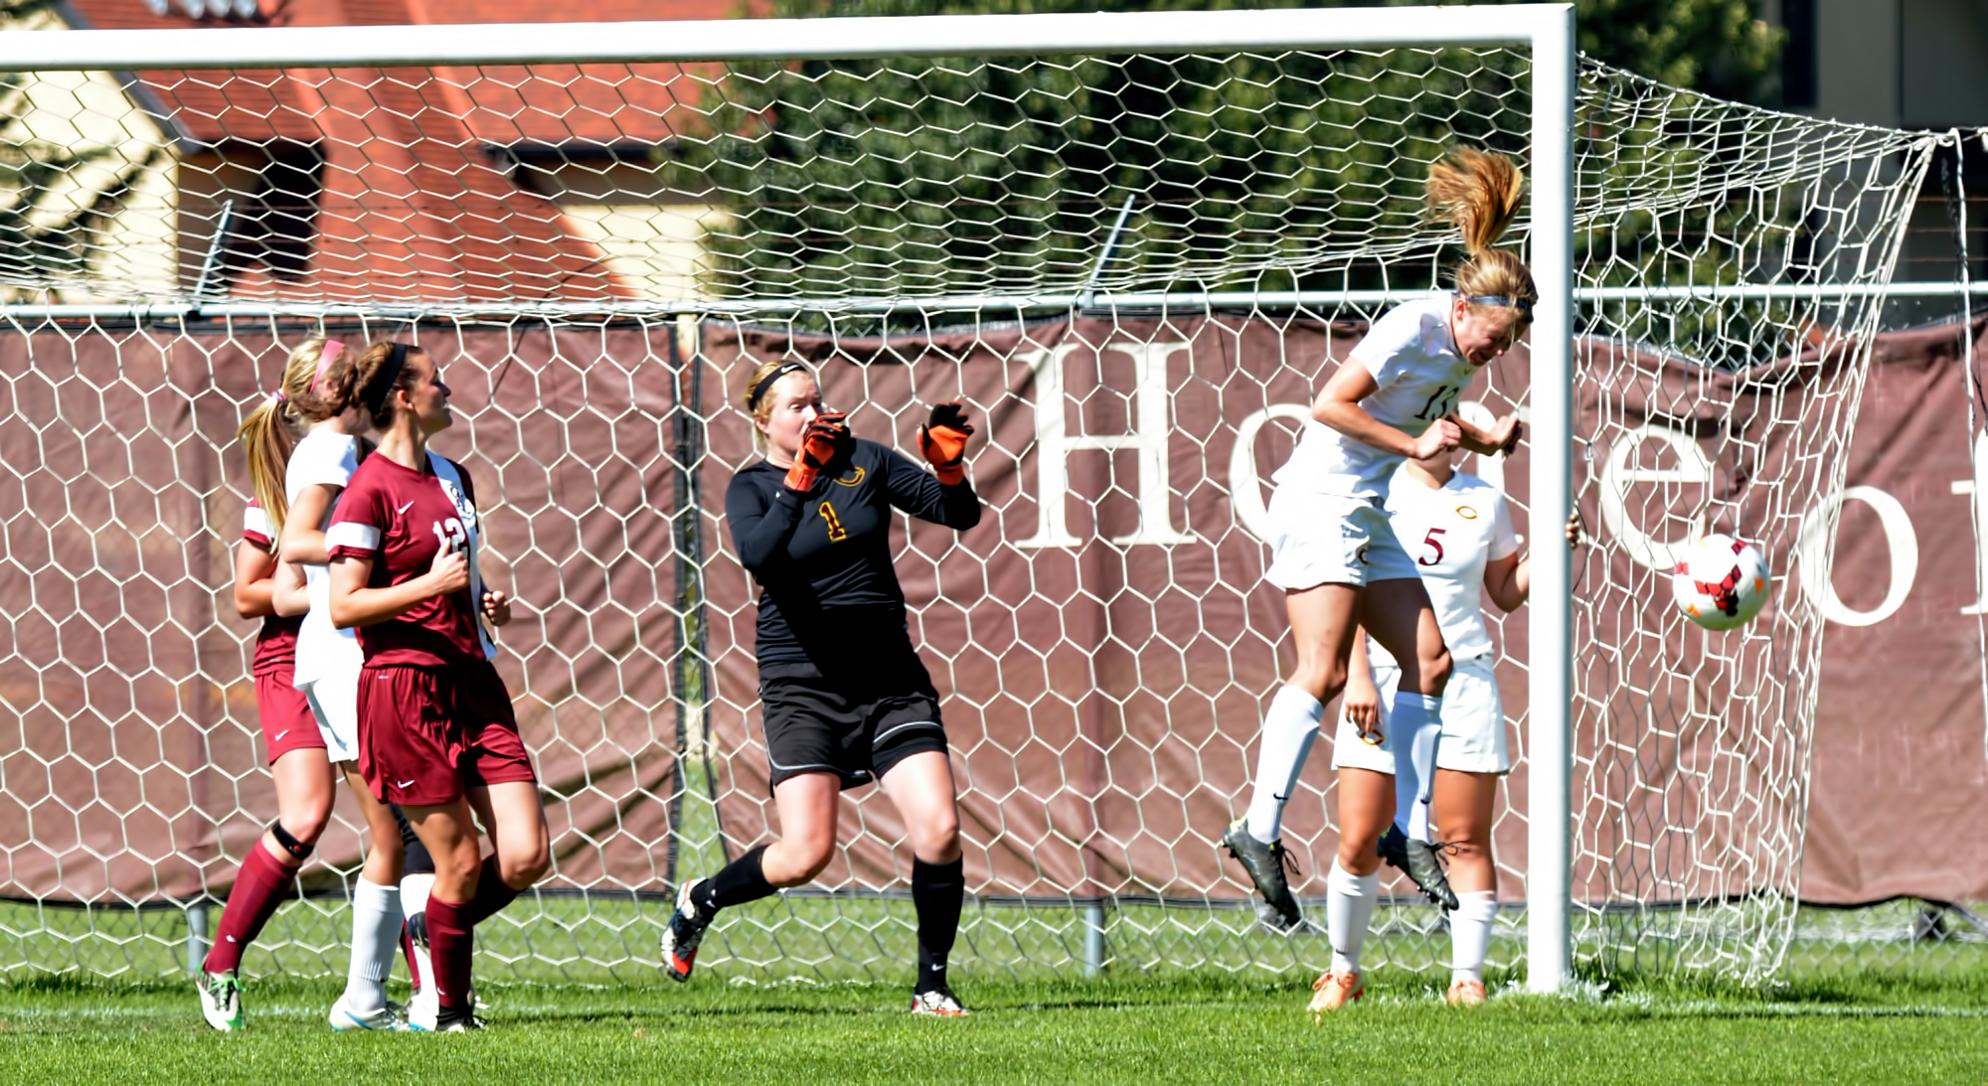 Senior defender Carly Mickelson heads the ball away from goal in the Cobbers' MIAC opener against Hamline.